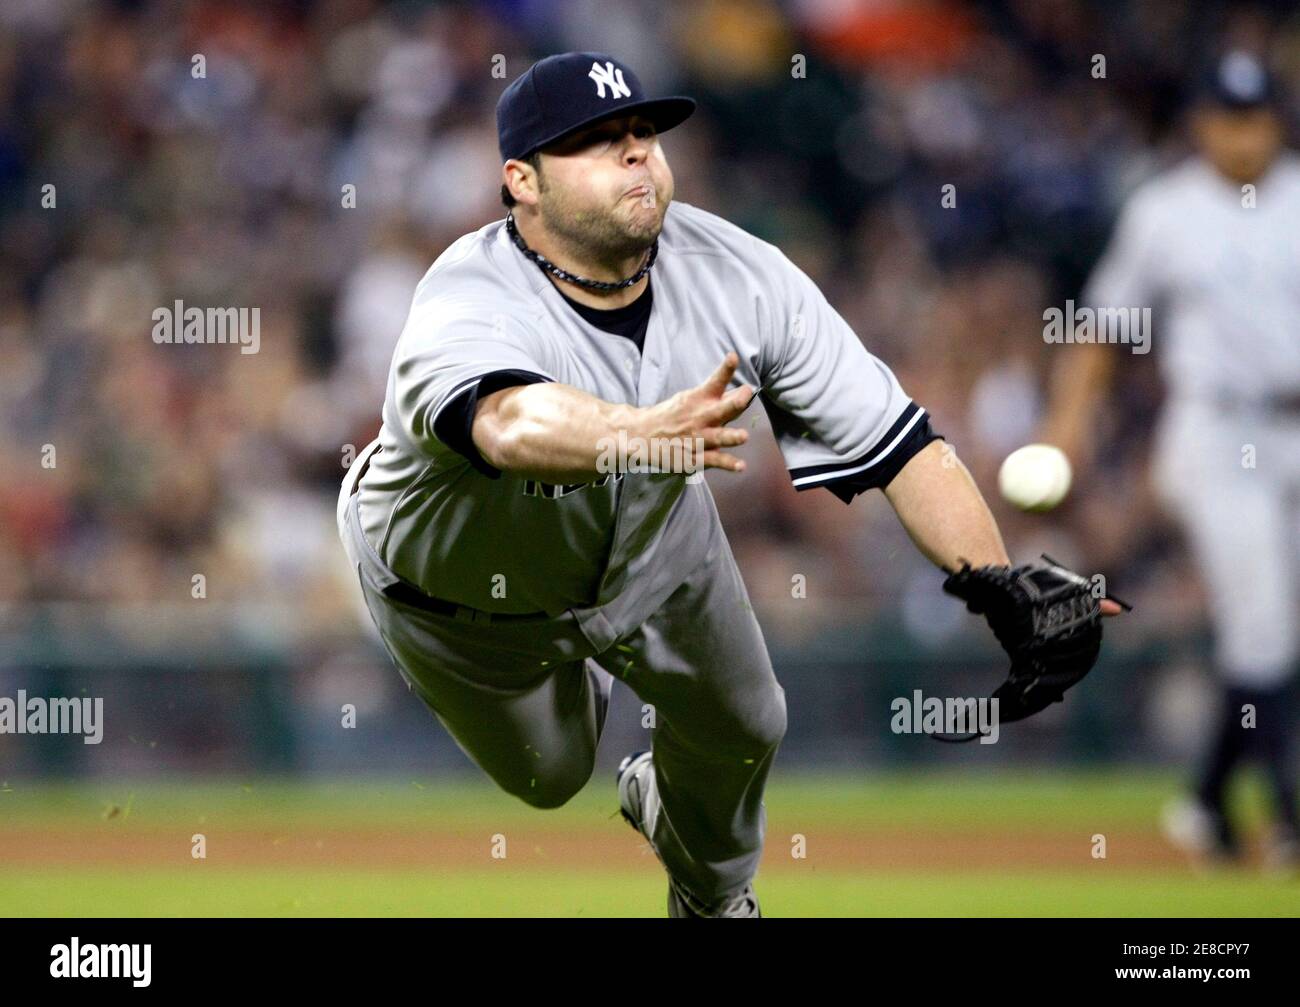 New York Yankees relief pitcher Joba Chamberlain is late on the throw to first after Detroit Tigers Austin Jackson singled to the pitcher during the eighth inning of game 2 of their double-header MLB baseball game in Detroit, Michigan May 12, 2010.  REUTERS/Rebecca Cook   (UNITED STATES - Tags: SPORT BASEBALL) Stock Photo